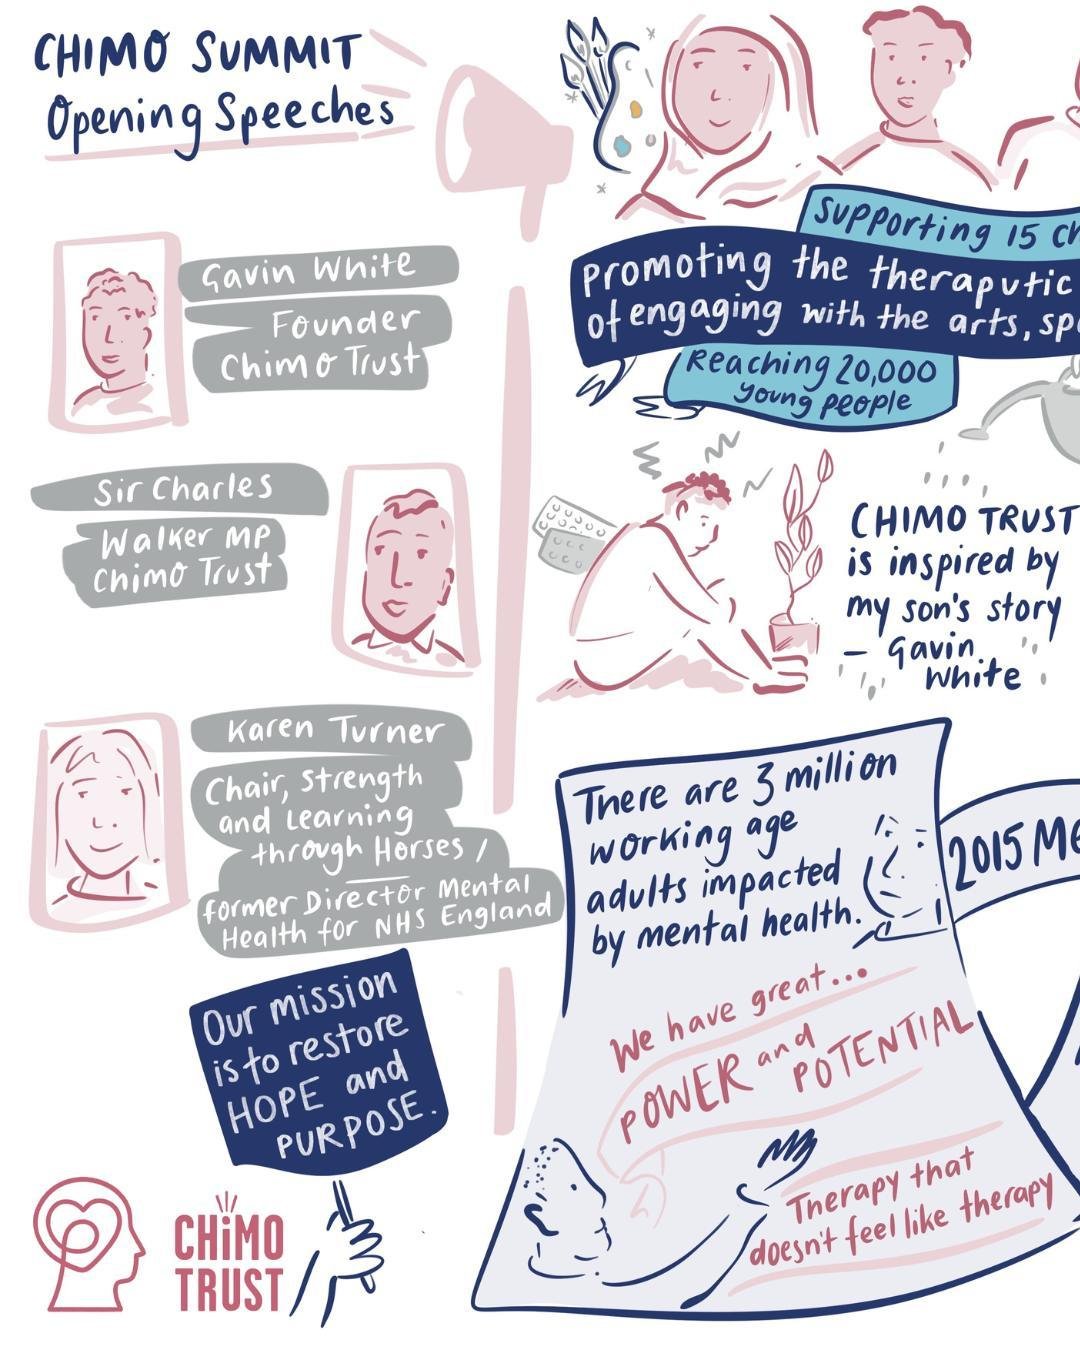 Over the next few weeks, I'll be sharing updates from my portfolio, featuring some of the live illustration drawings I've created at recent events. 

Here's one of my pieces from the Chimo Trust Summit event I attended last month. 

@chimotrust suppo